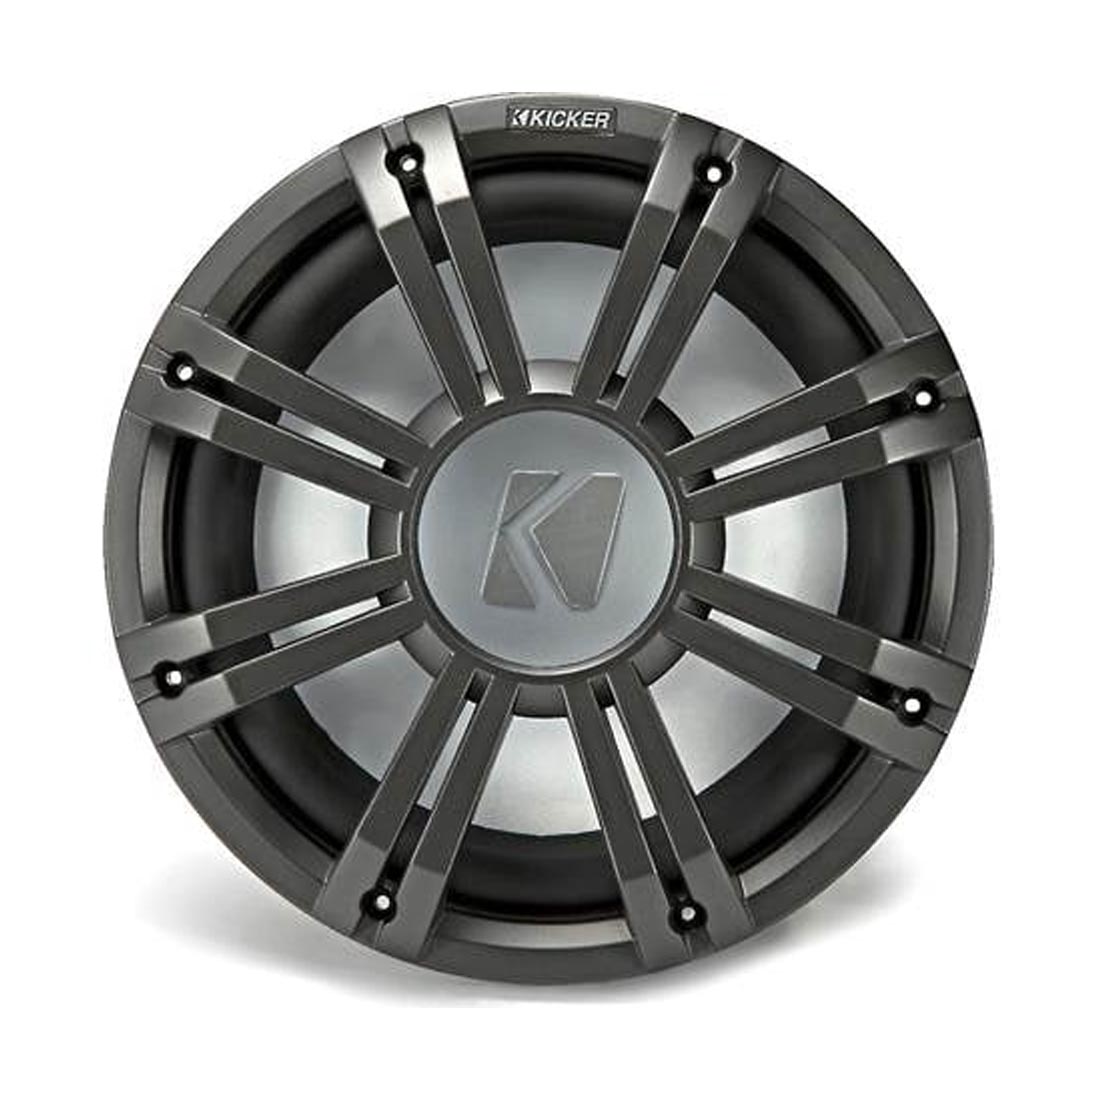 Kicker 45KMG10C 10″ LED Marine Subwoofer Grille — for KM10 and KMF10 Subs – Charcoal – Each